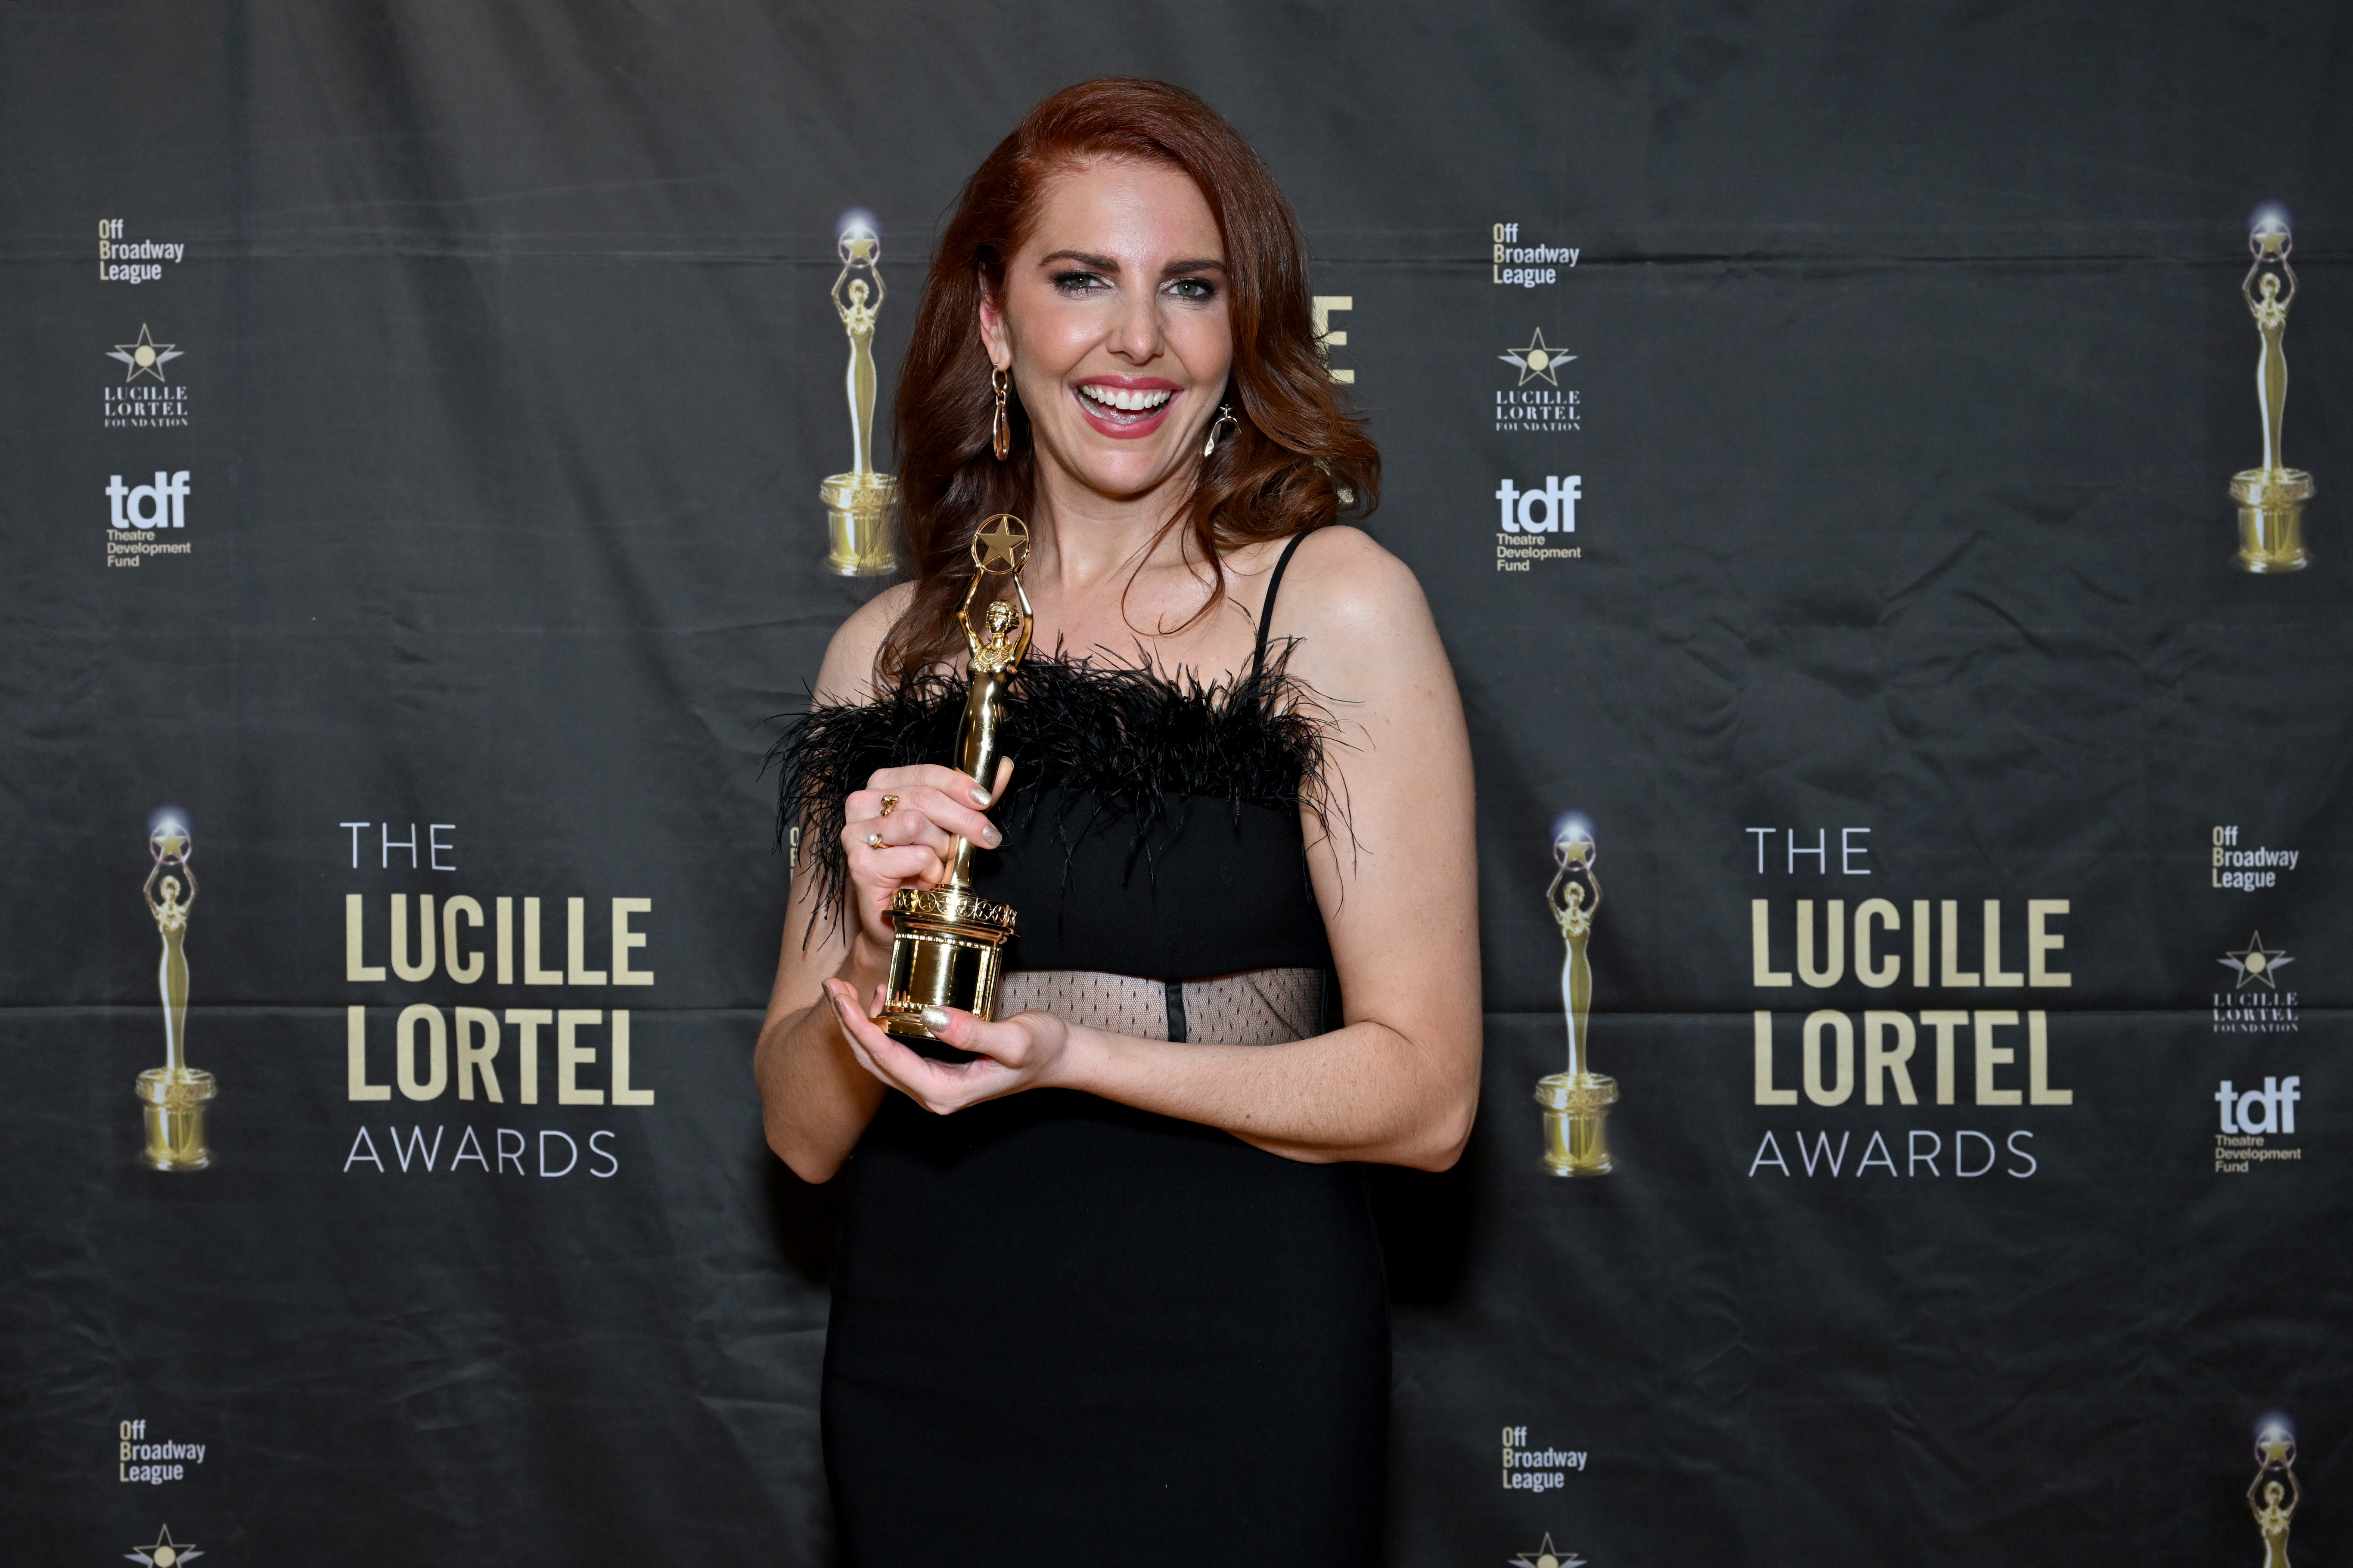 Marla Mindelle poses with an award in the press room during the 38th Annual Lucille Lortel Awards at NYU Skirball Center